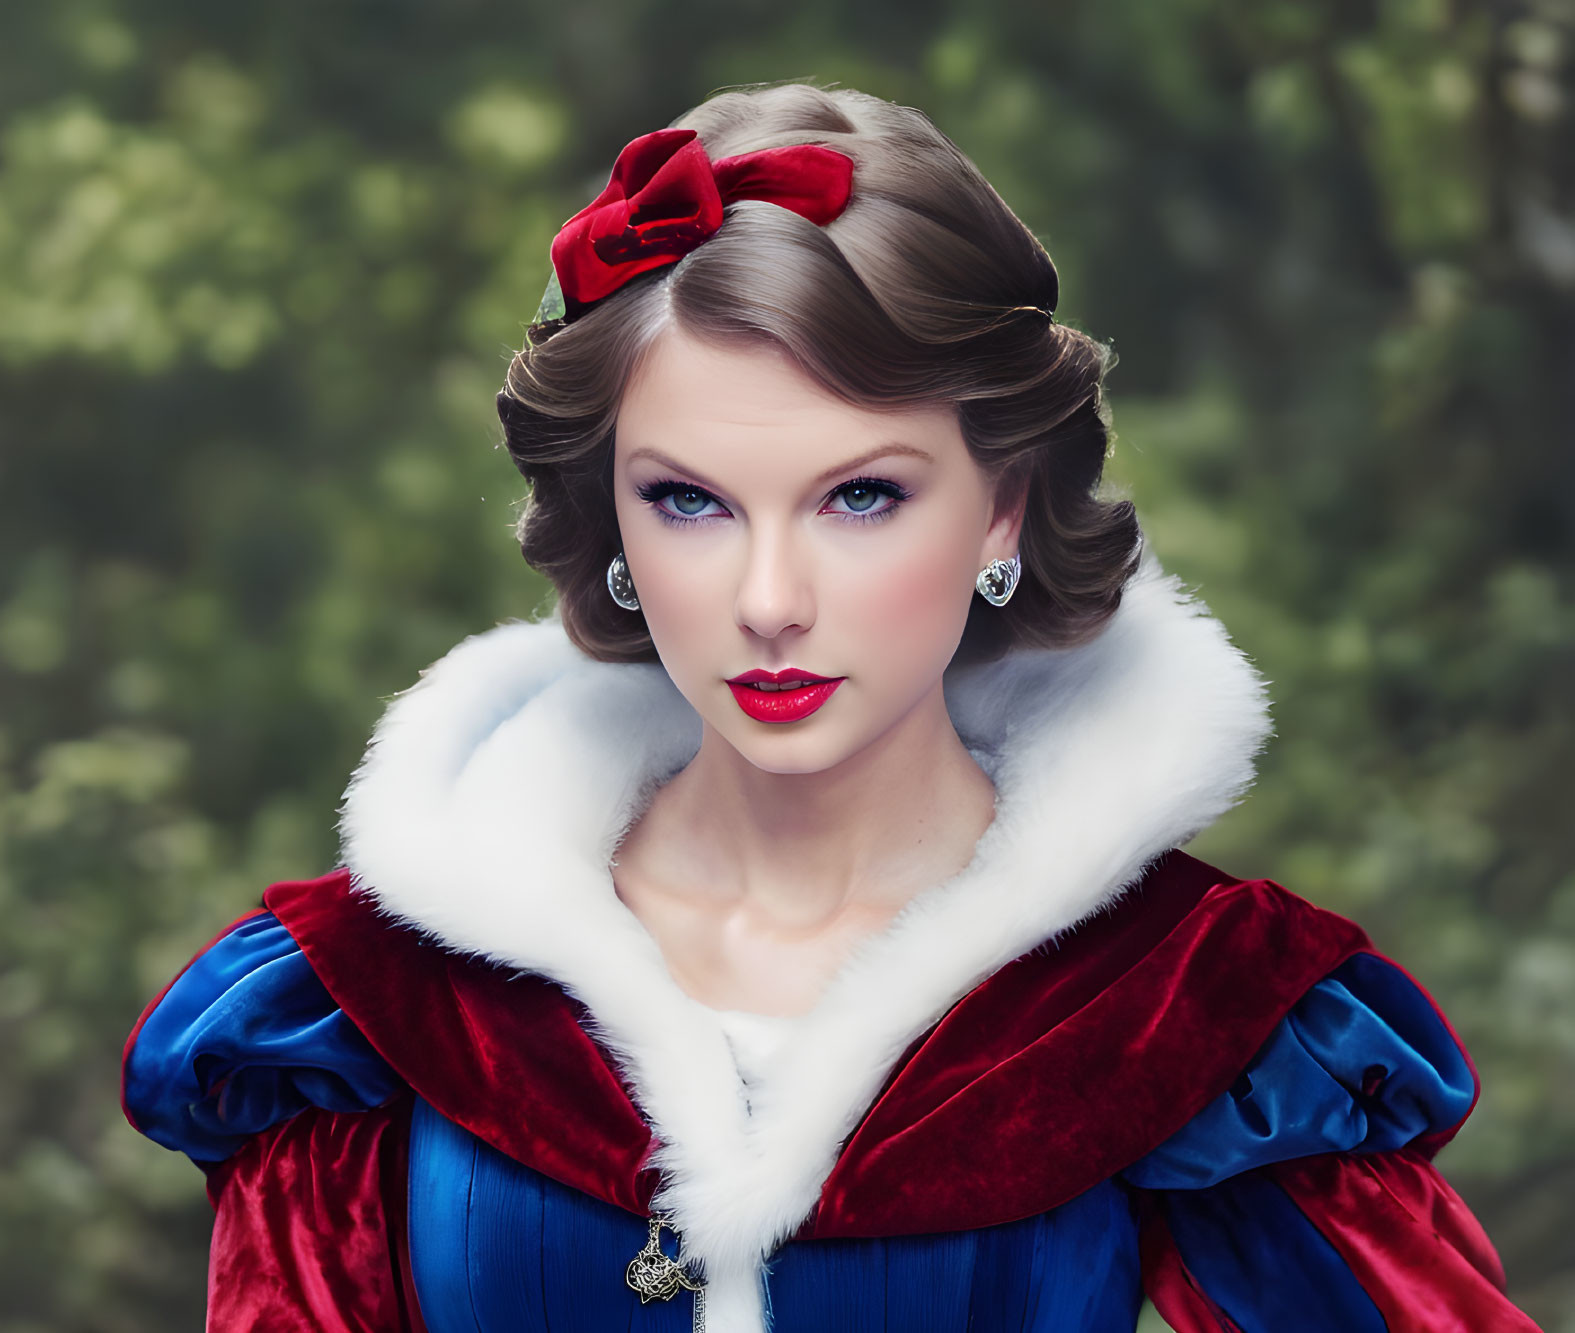 ANDRE´S ART TAYLOR SWIFT AS PRINCESS SNOW WHITE 